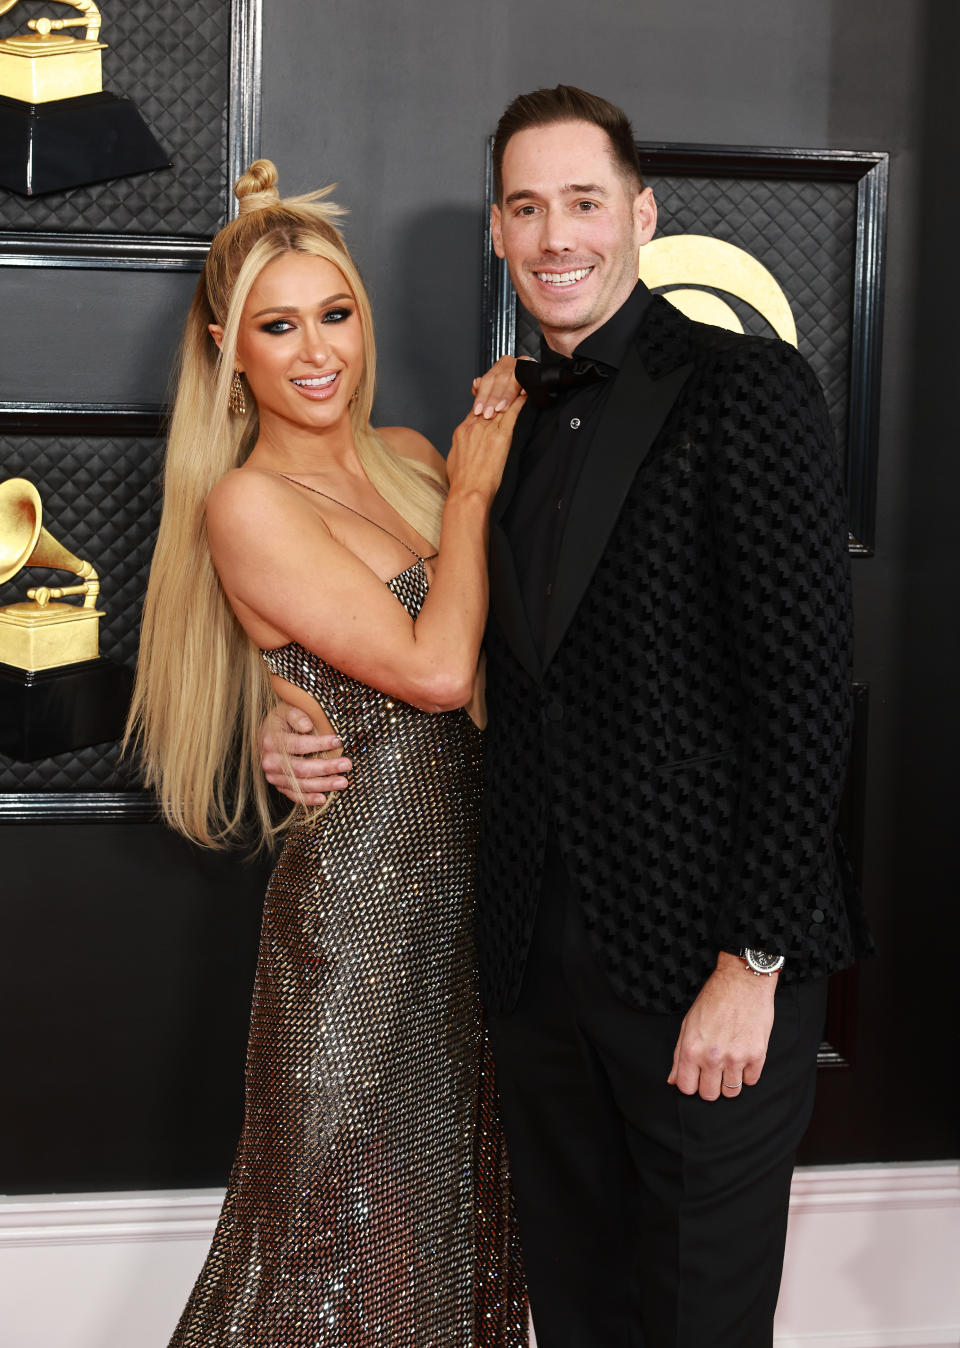 LOS ANGELES, CALIFORNIA - FEBRUARY 05: Paris Hilton and Carter Reum attend the 65th GRAMMY Awards on February 05, 2023 in Los Angeles, California. (Photo by Matt Winkelmeyer/Getty Images for The Recording Academy)